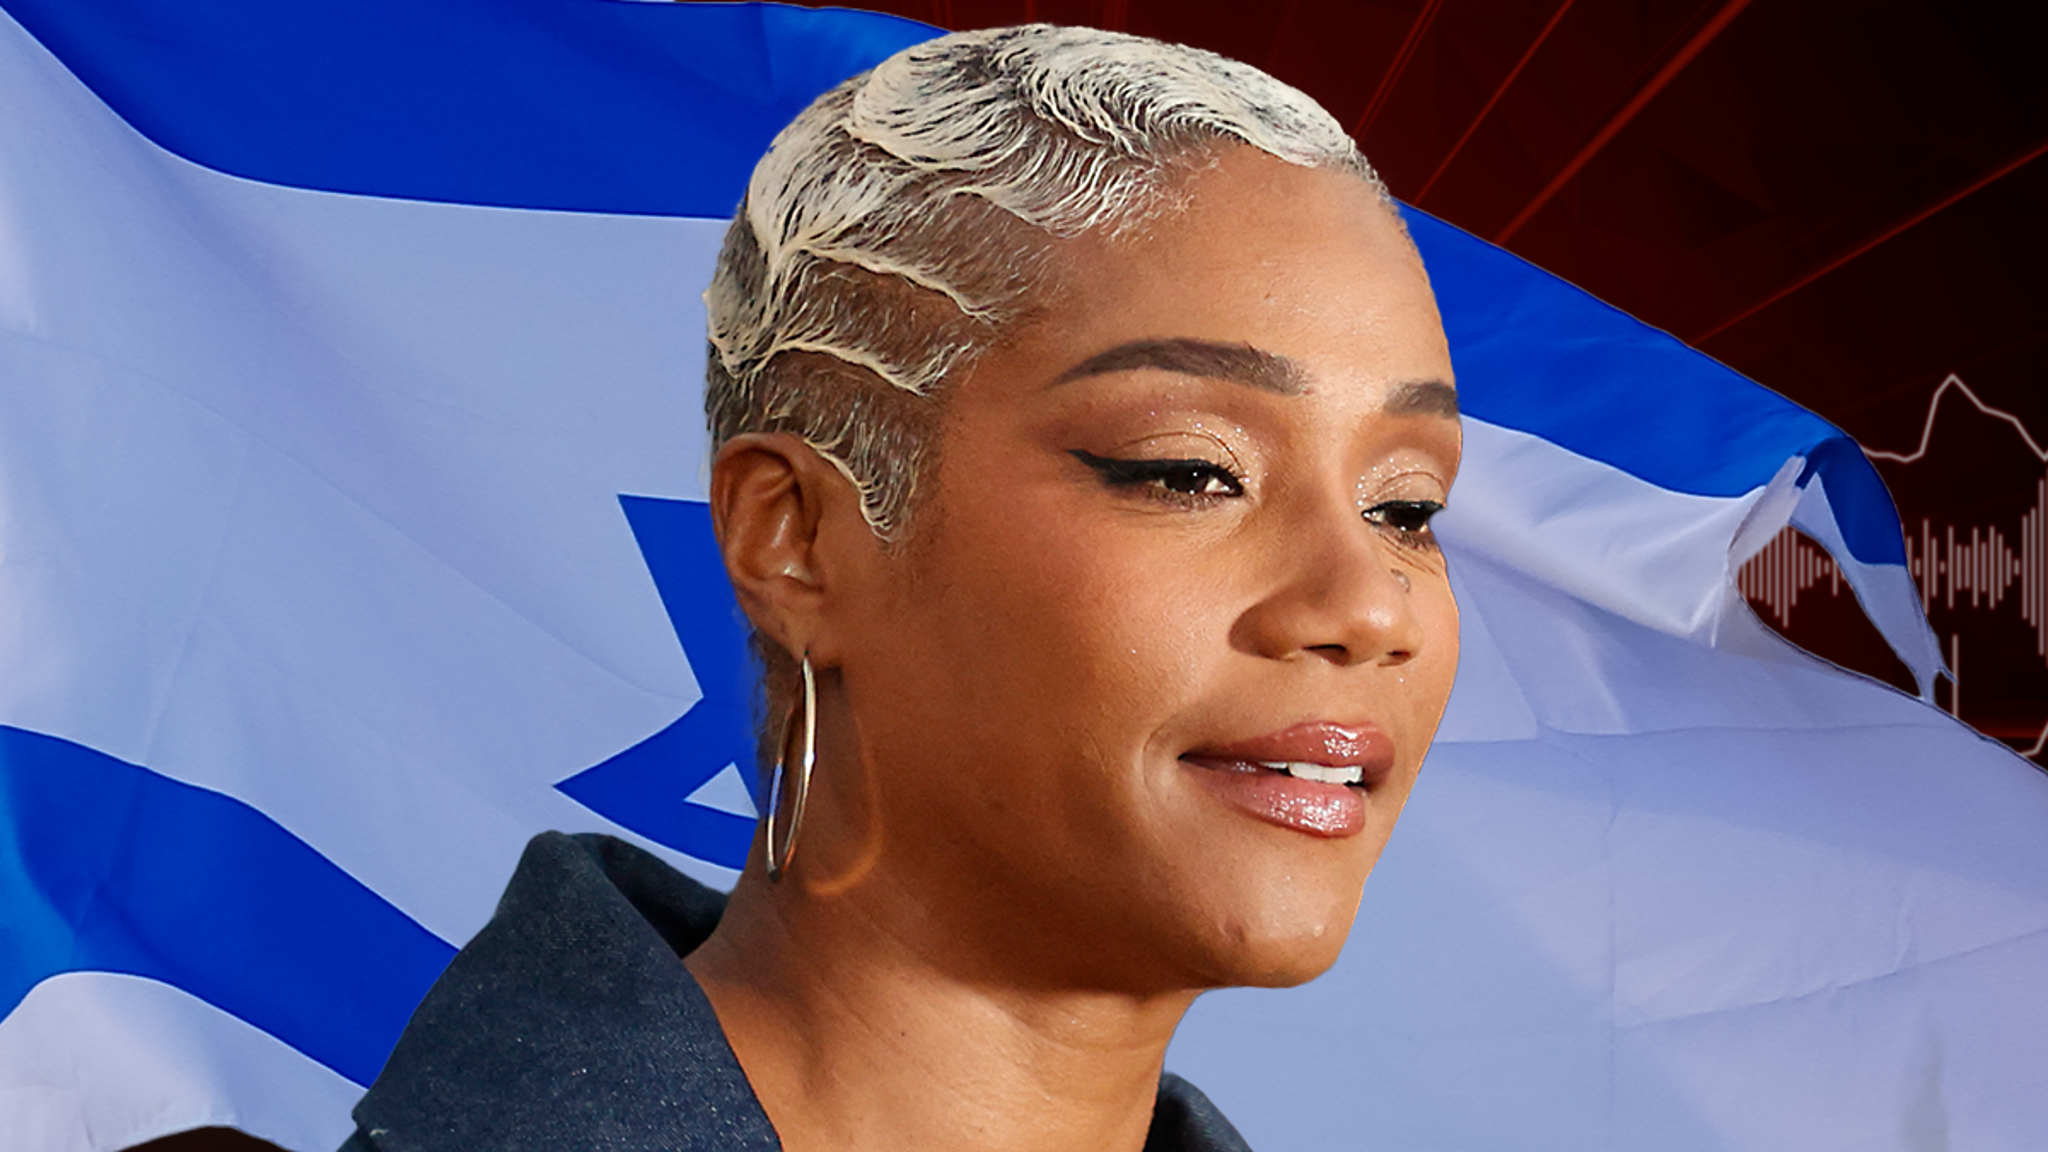 Tiffany Haddish Takes Emotional Journey to Defend Israel, Says She's 'All Alone'